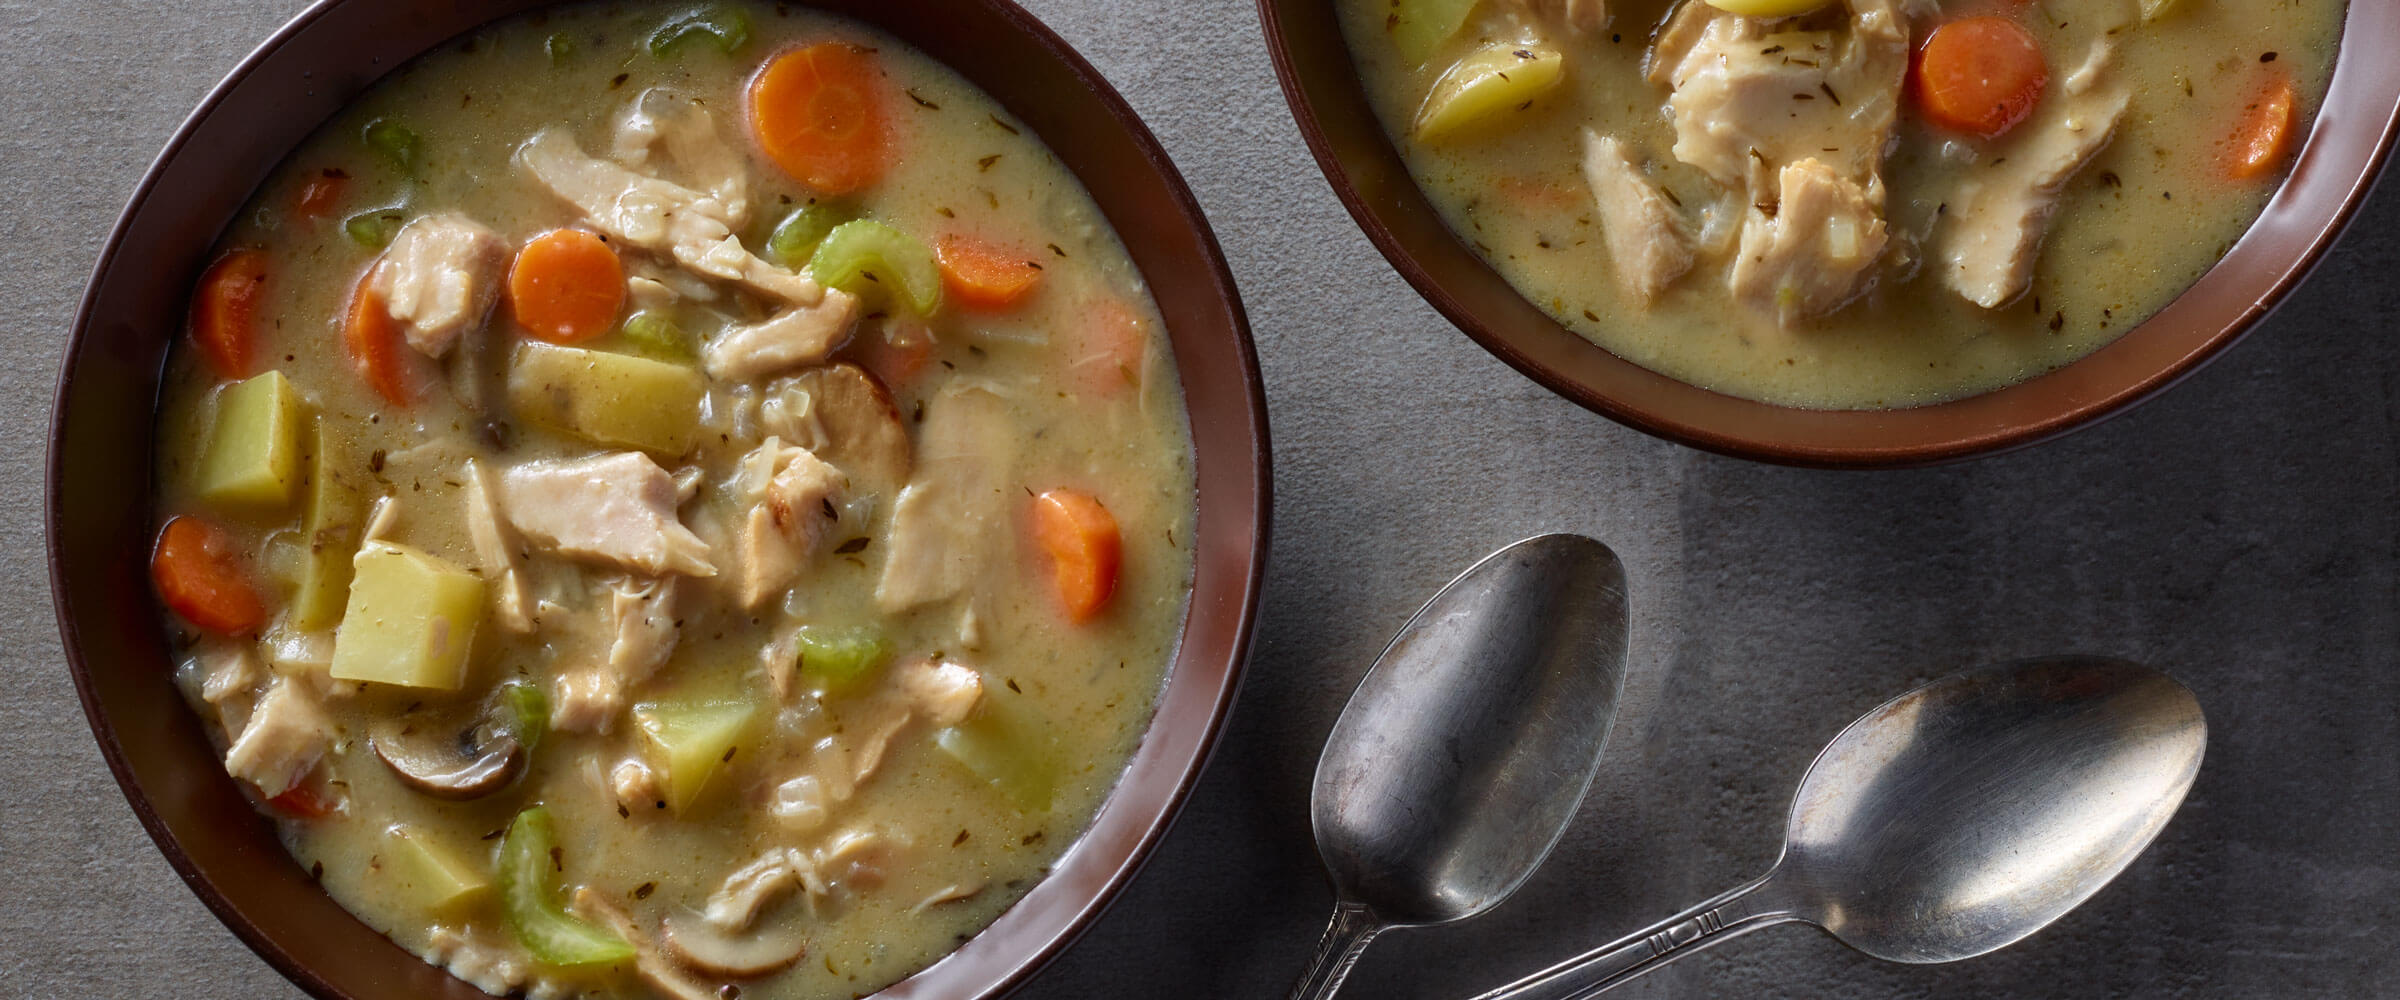 Turkey Stew in two bowls with spoons